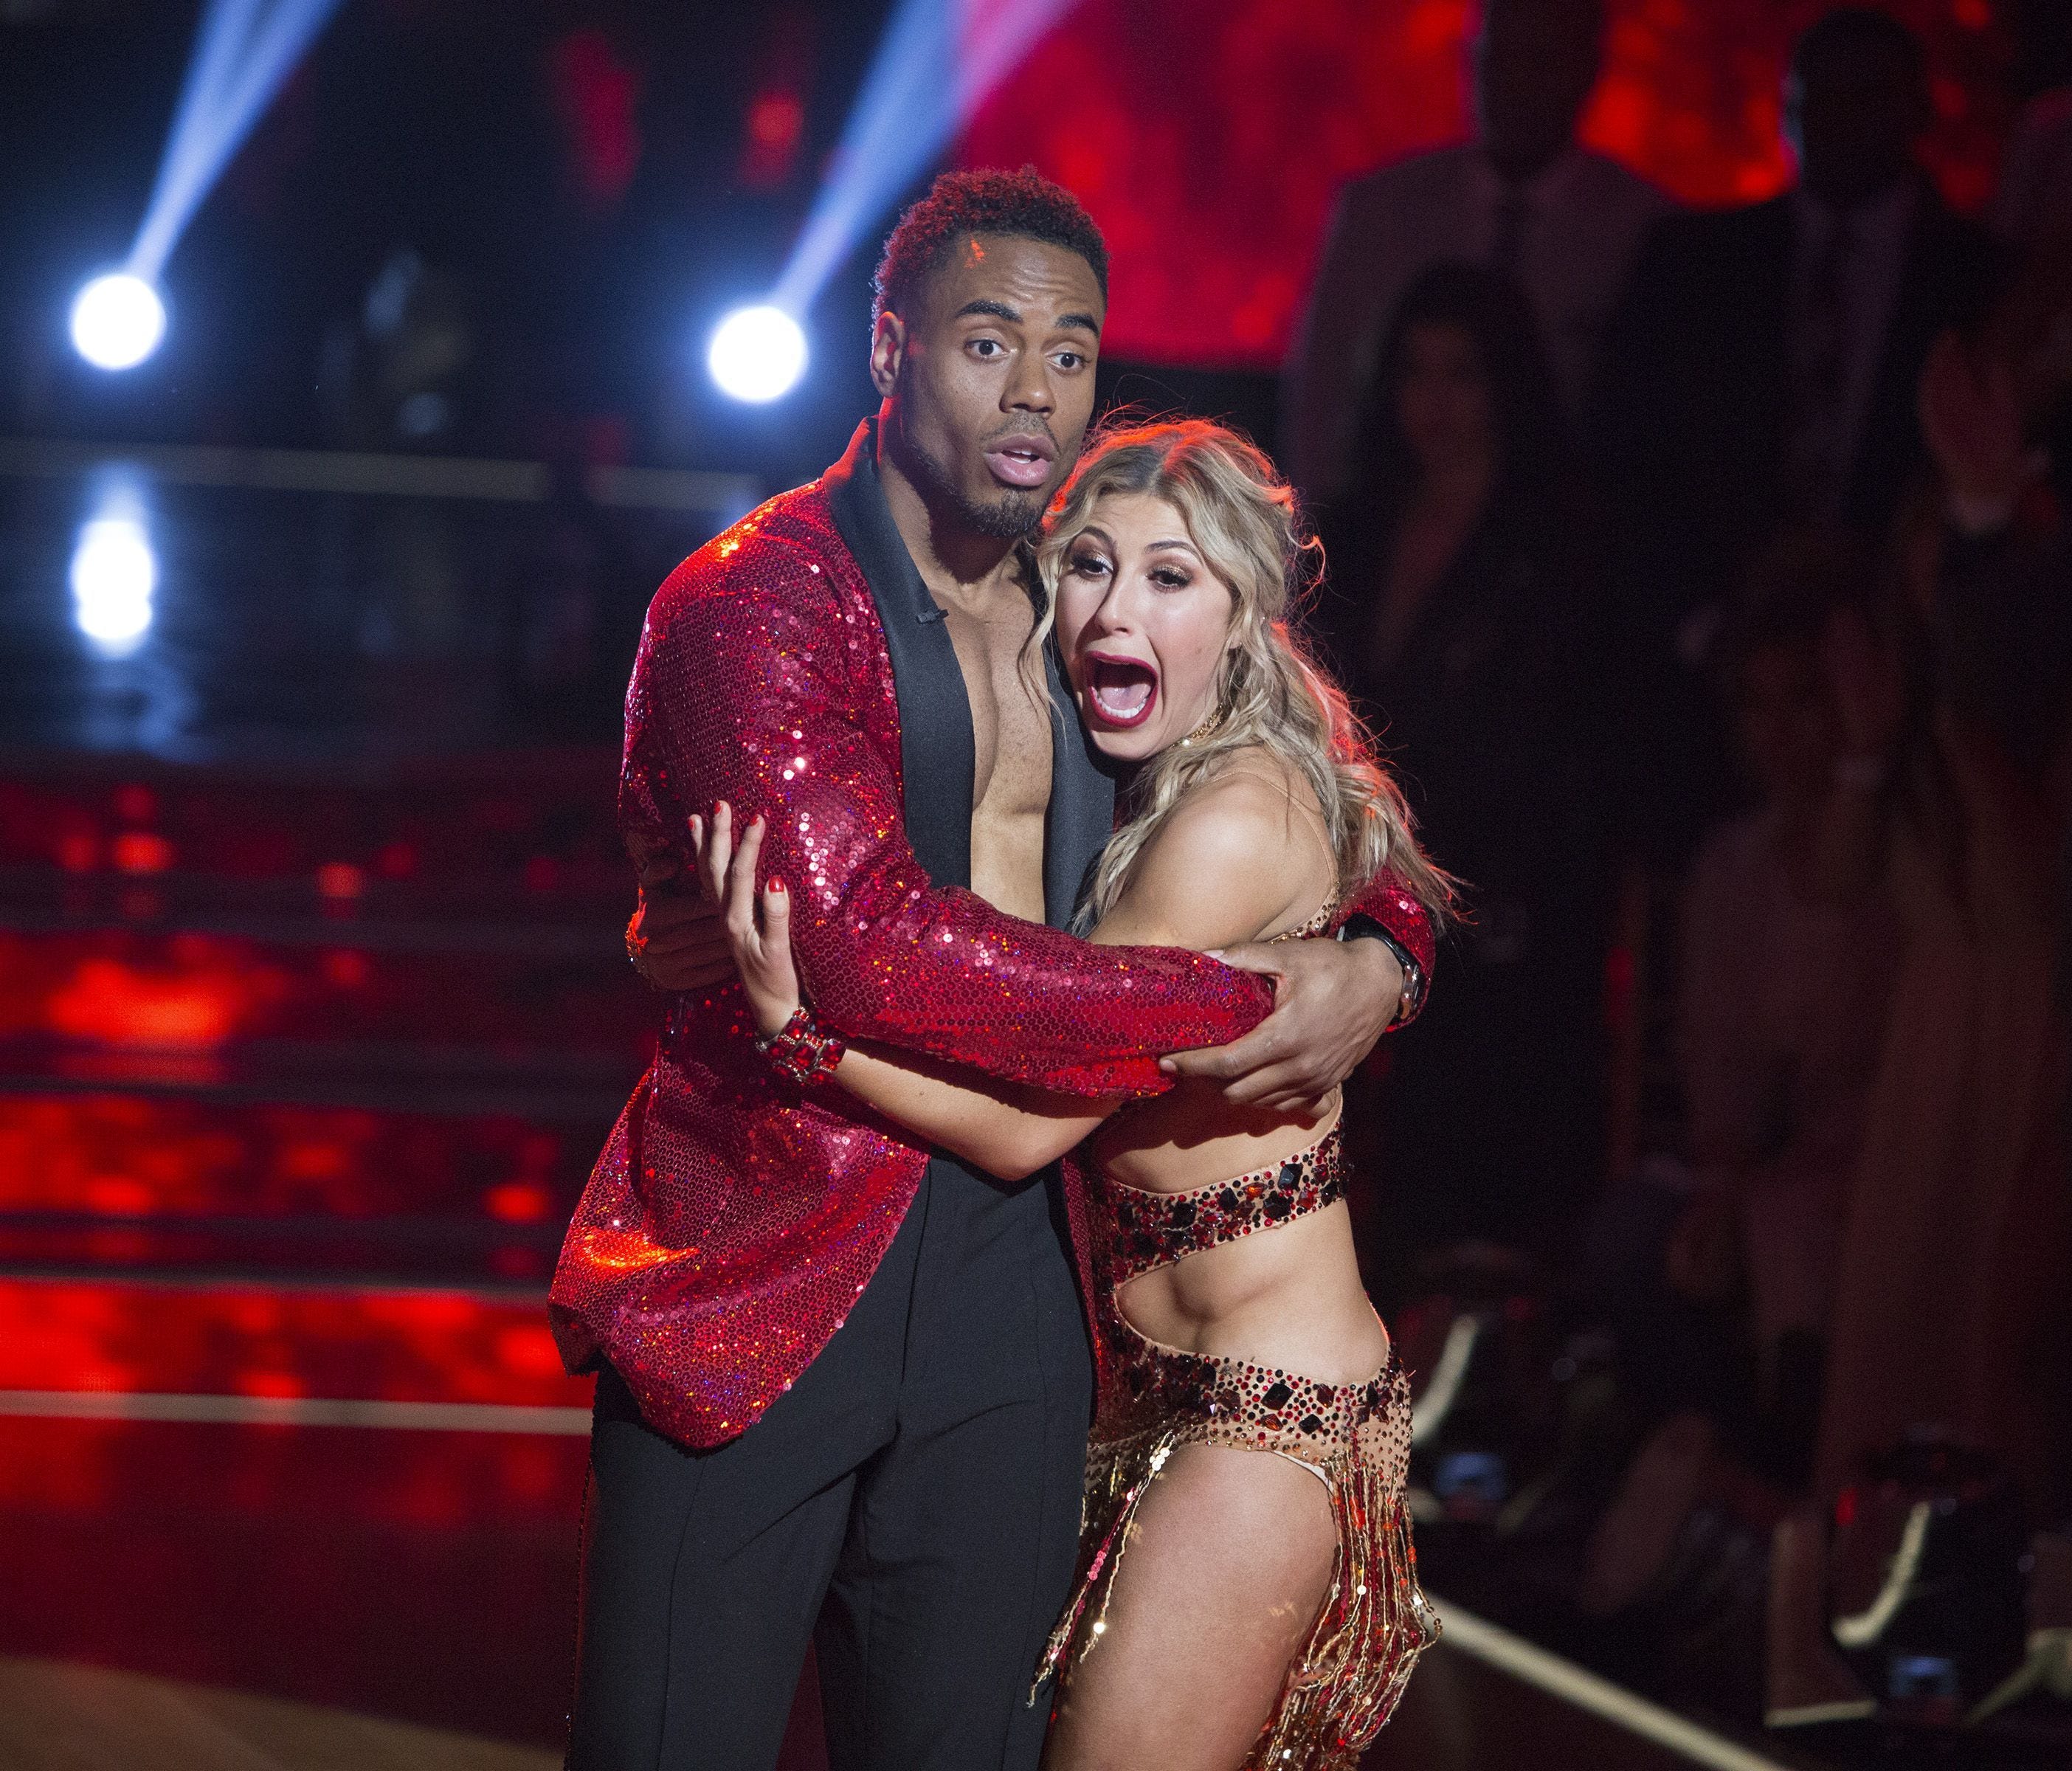 'Dancing with the Stars' champ Rashad Jennings, left, hugging partner Emma Slater, sure looks surprised just after hearing they won ABC's 'Dancing with the Stars.''